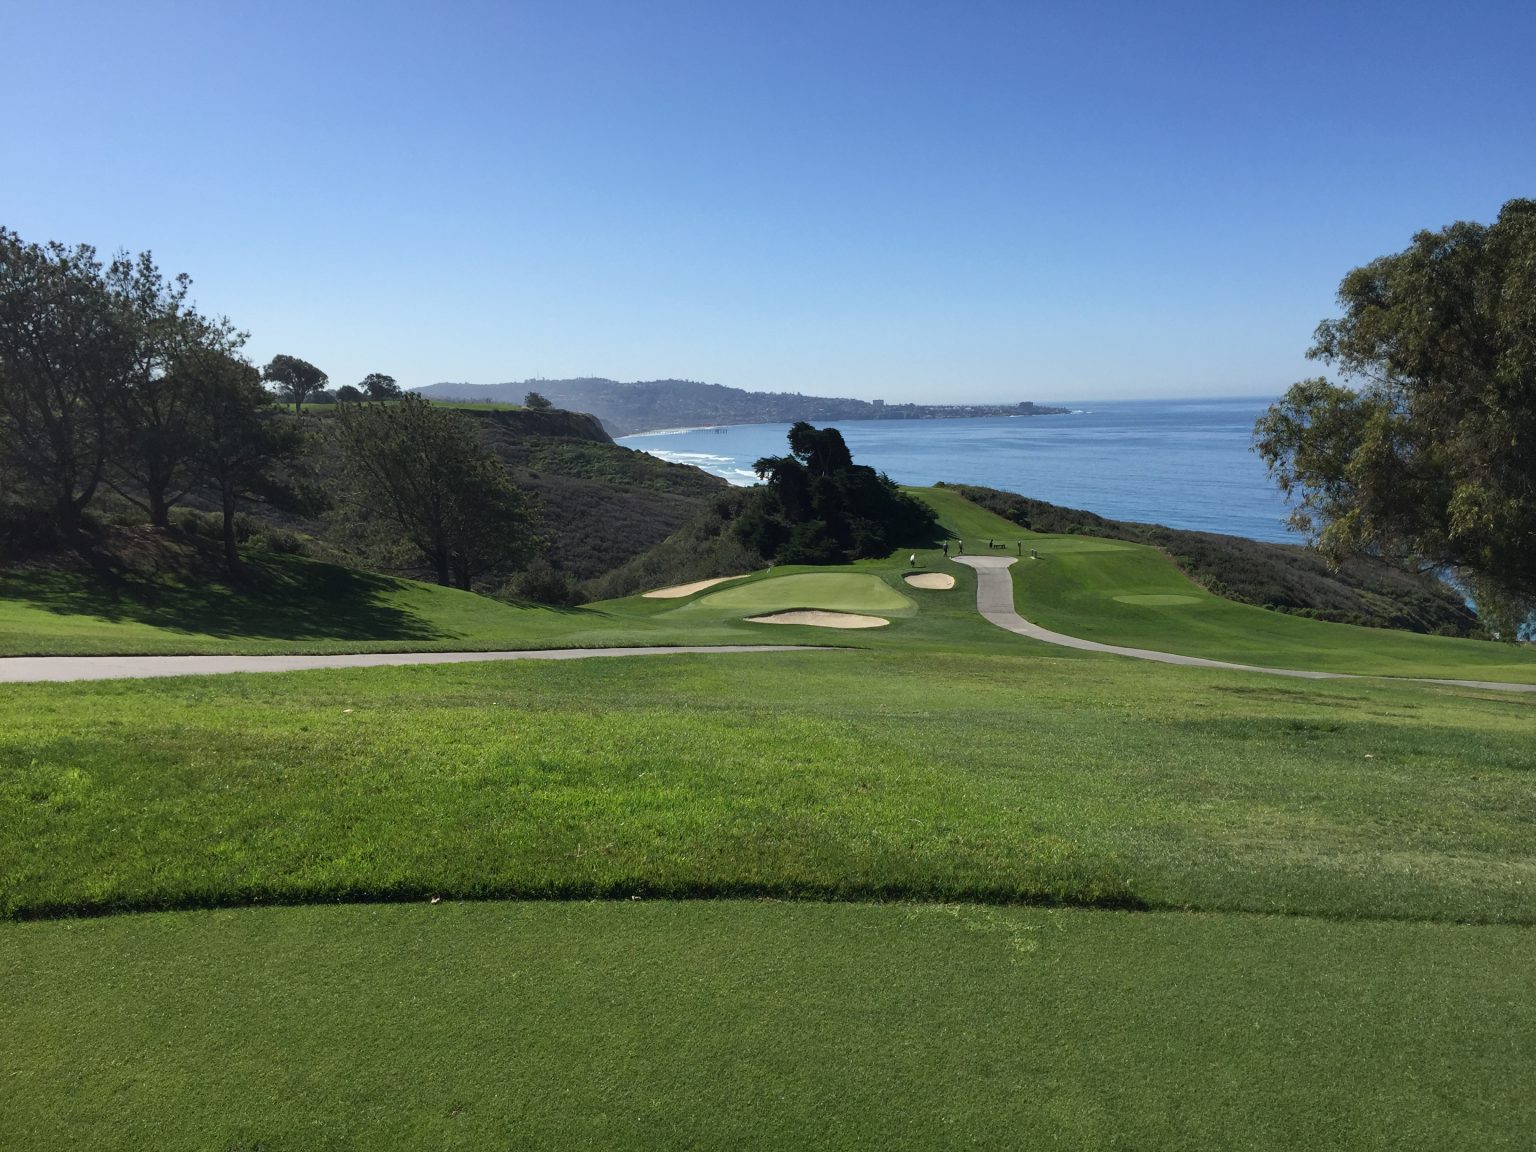 TORREY PINES GOLF COURSE BOOK A GROUP EVENT OUTING NATIONAL